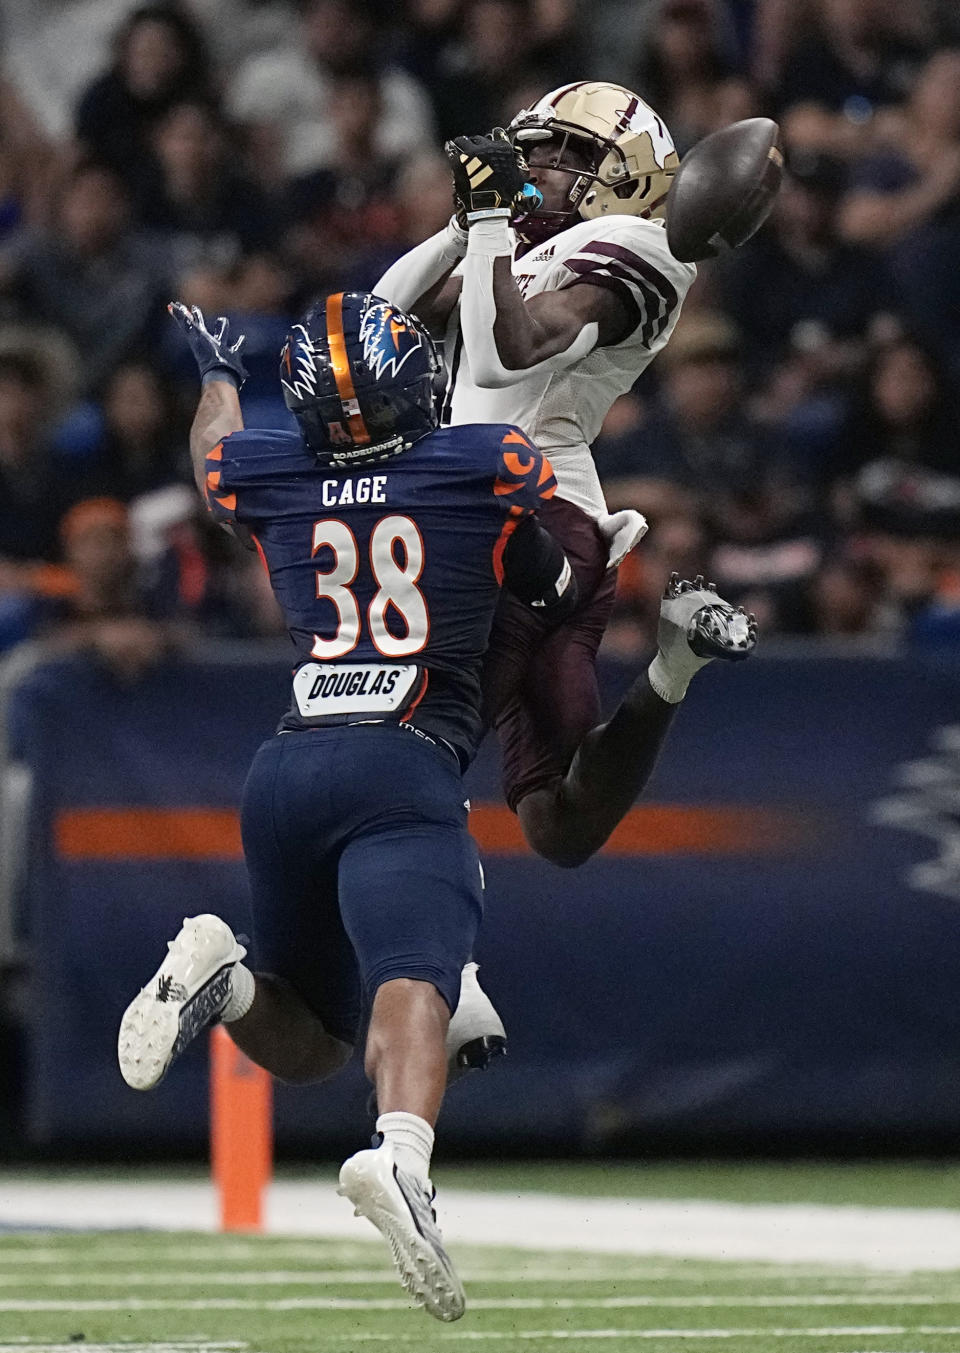 UTSA linebacker Pig Cage (38) breaks up a pass intended for Texas State wide receiver Ashtyn Hawkins (1) during the second half of an NCAA college football game, Saturday, Sept. 9, 2023, in San Antonio. (AP Photo/Eric Gay)